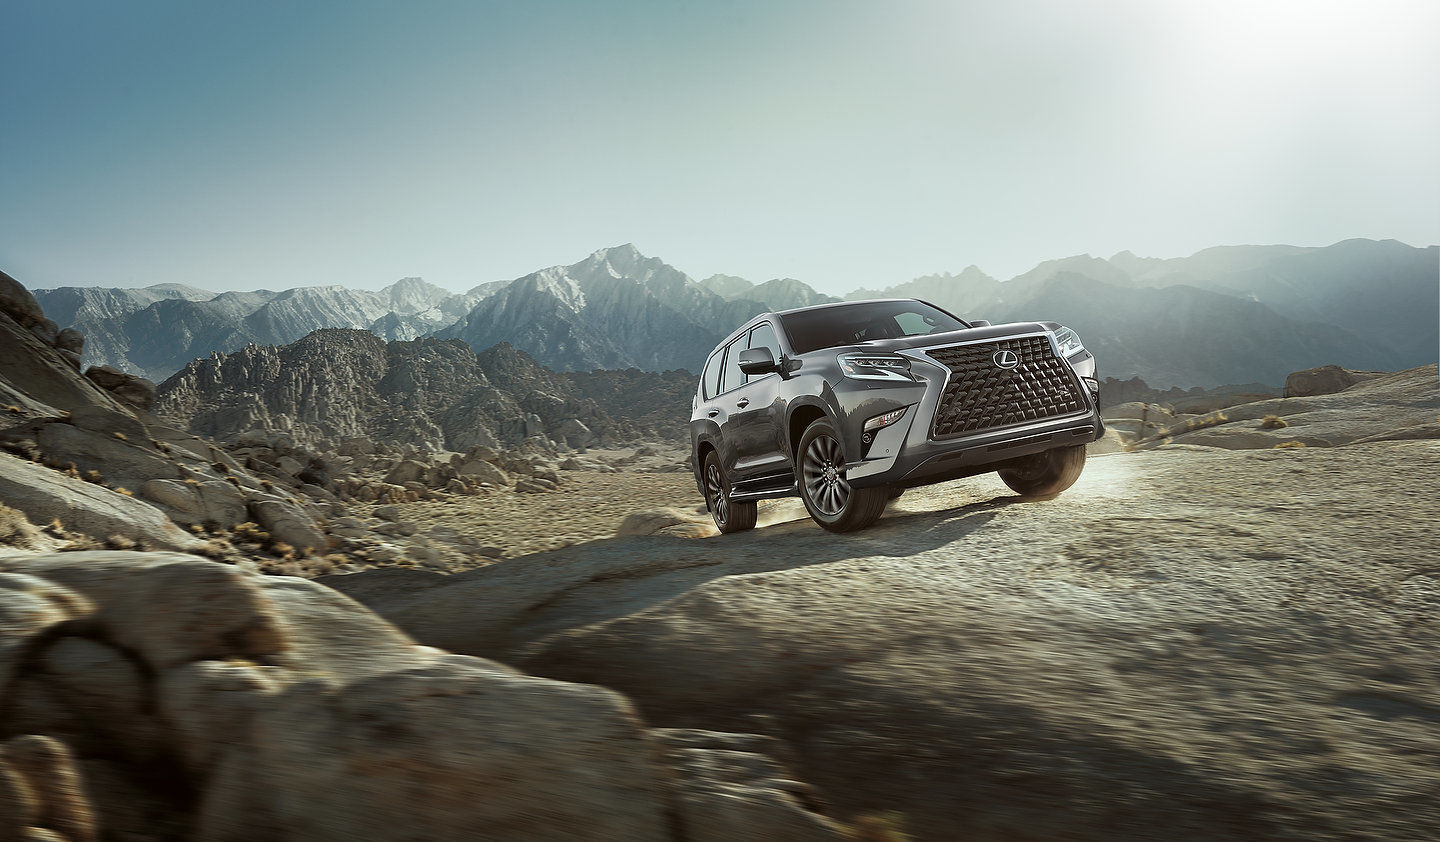 Lexus and Off-Road Driving; An Overview of Available Technologies